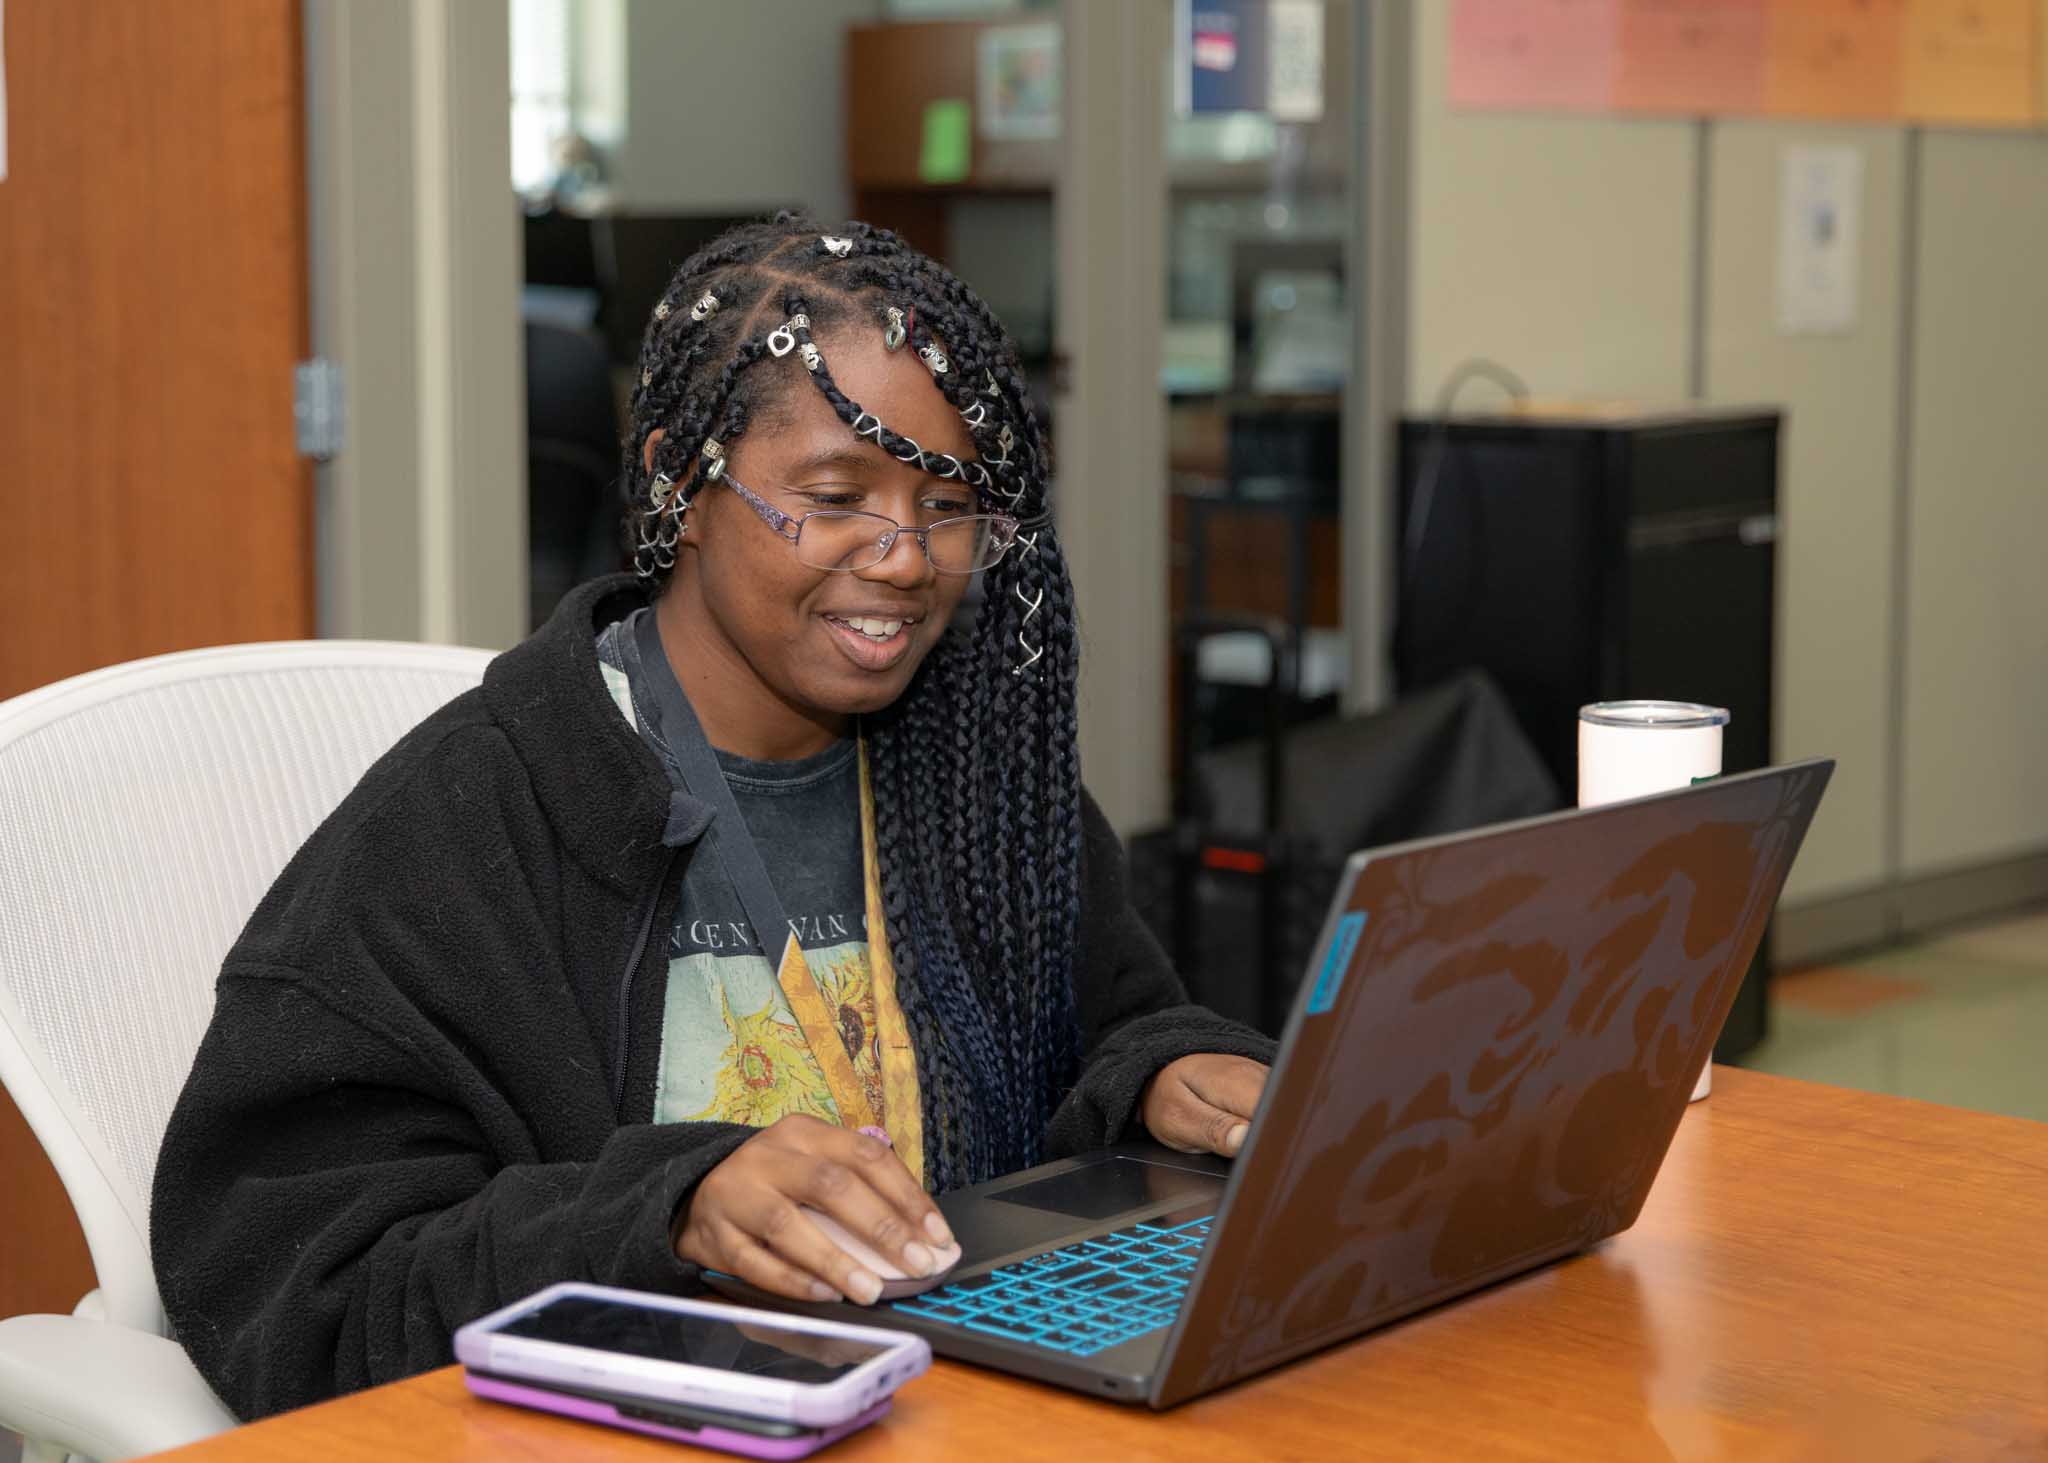 Female student in a black jacket working on a laptop and smiling.